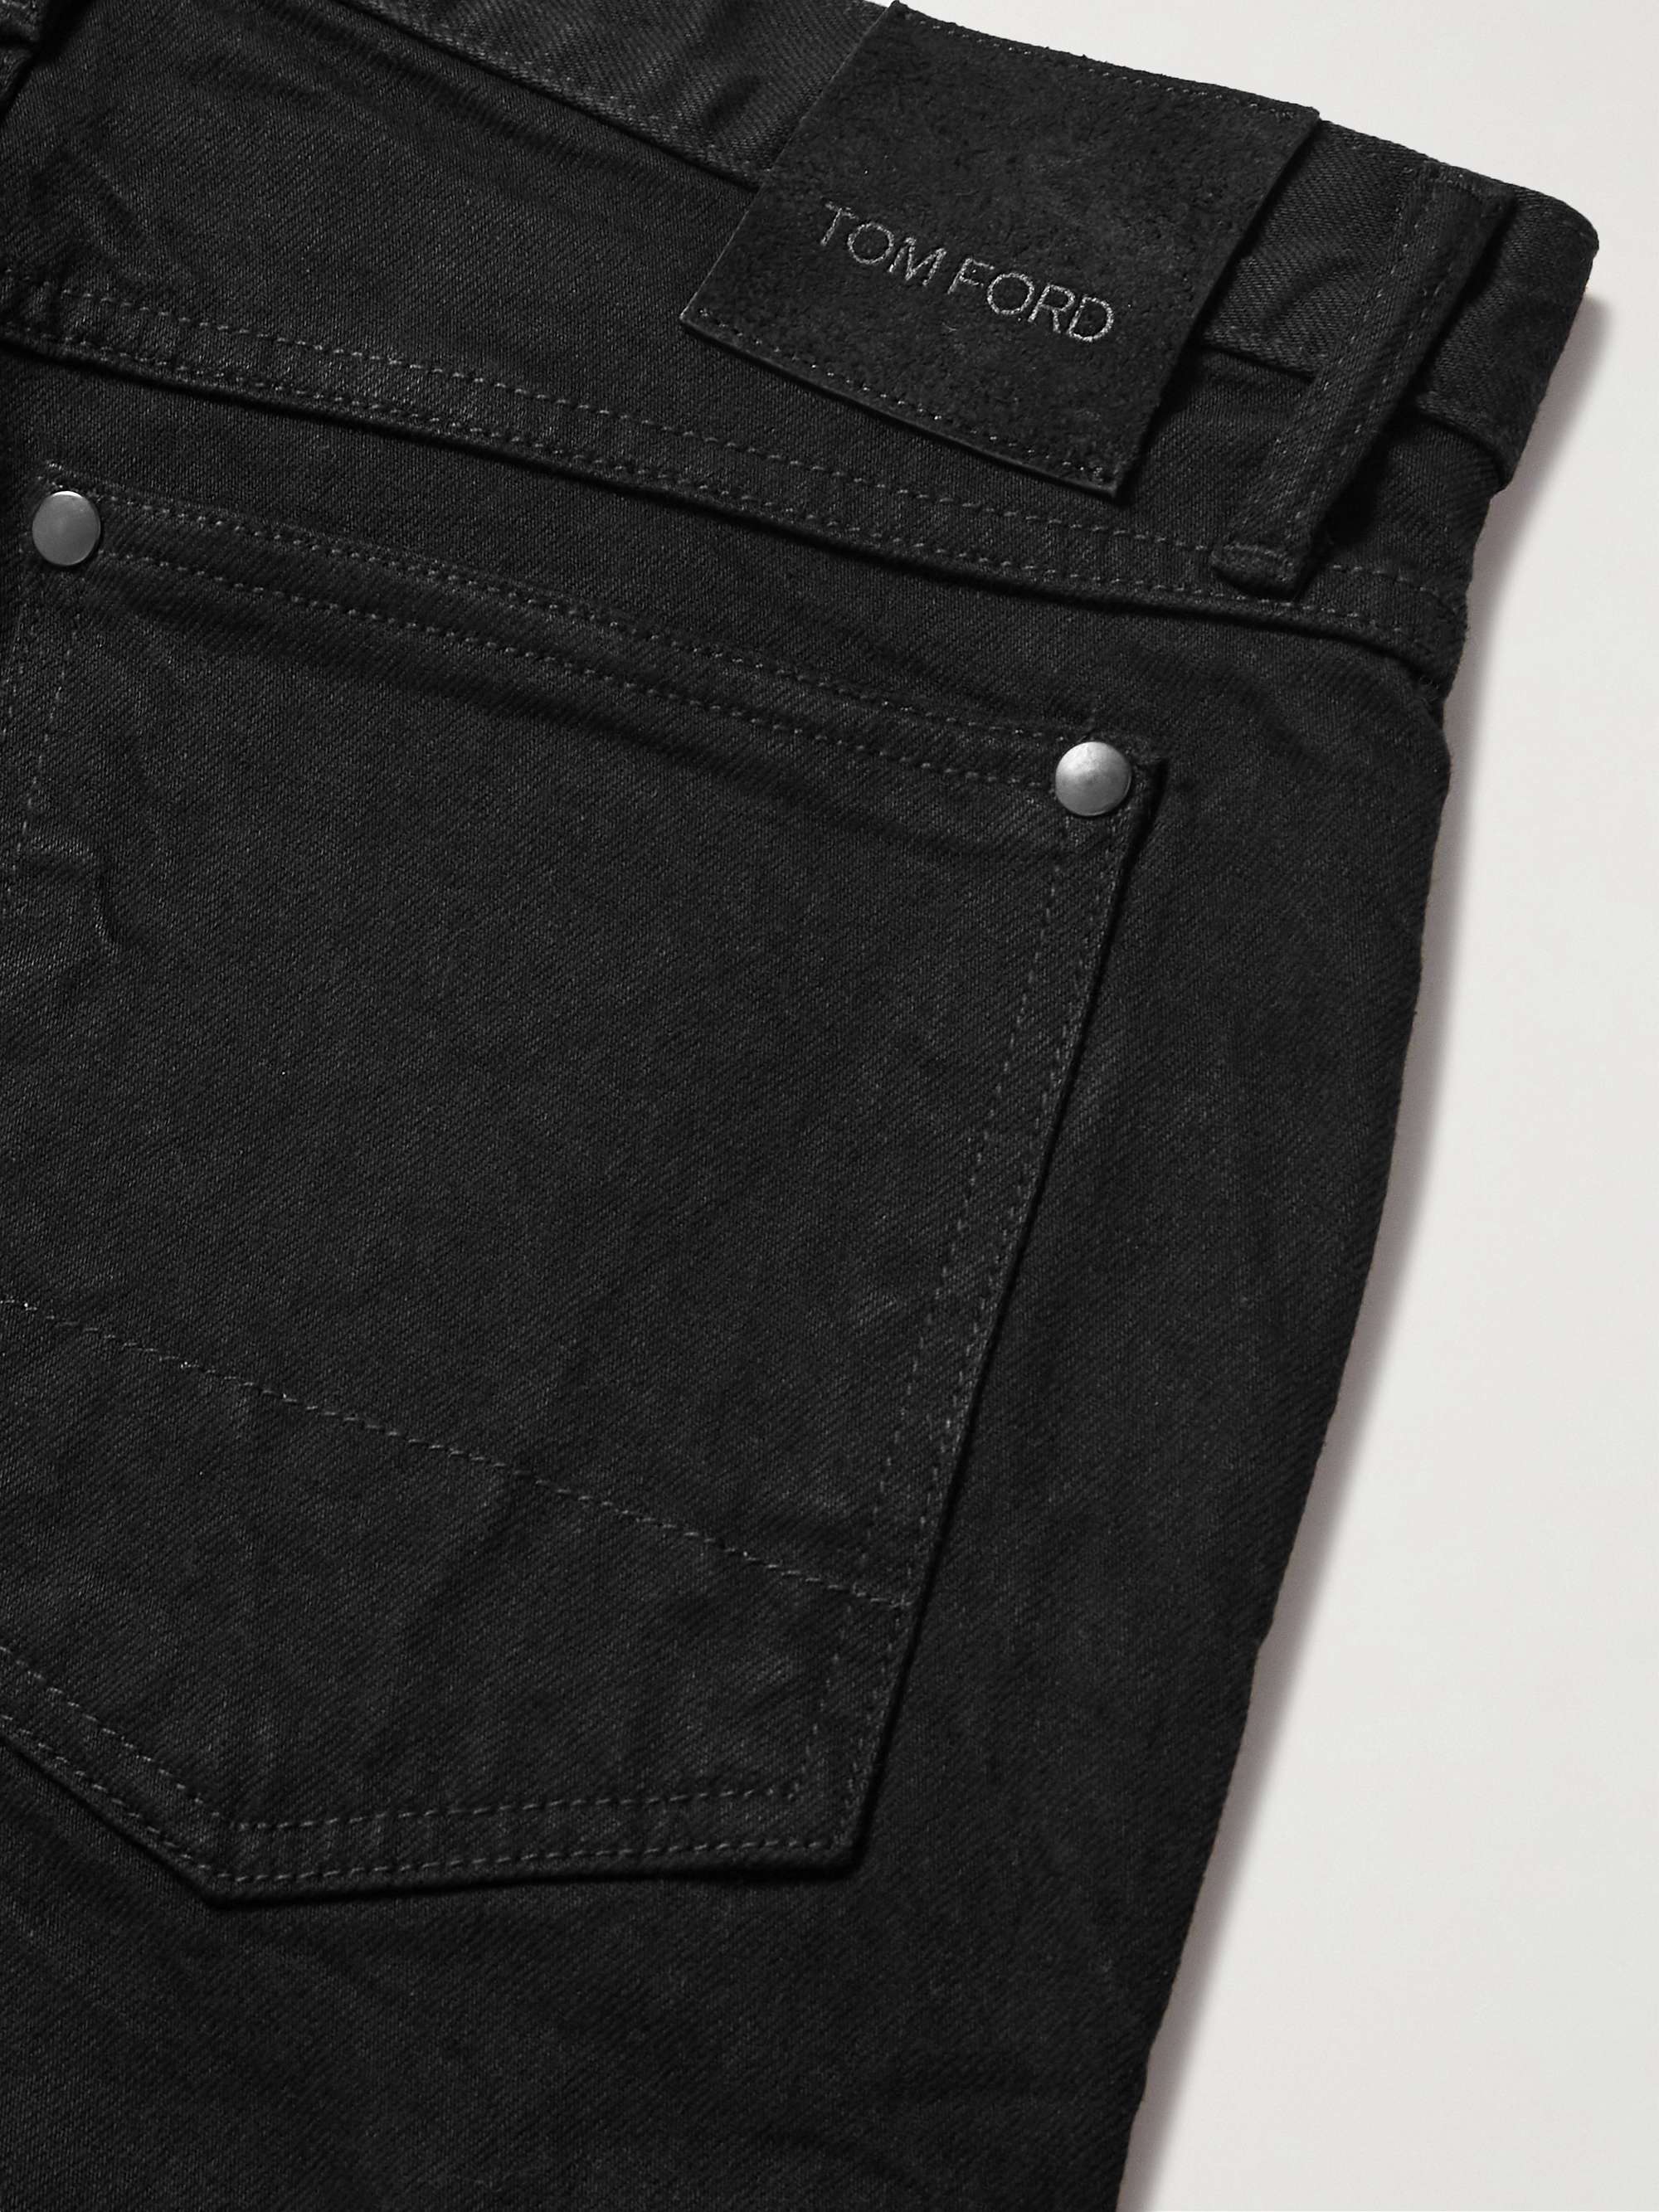 TOM FORD Tapered Selvedge Jeans